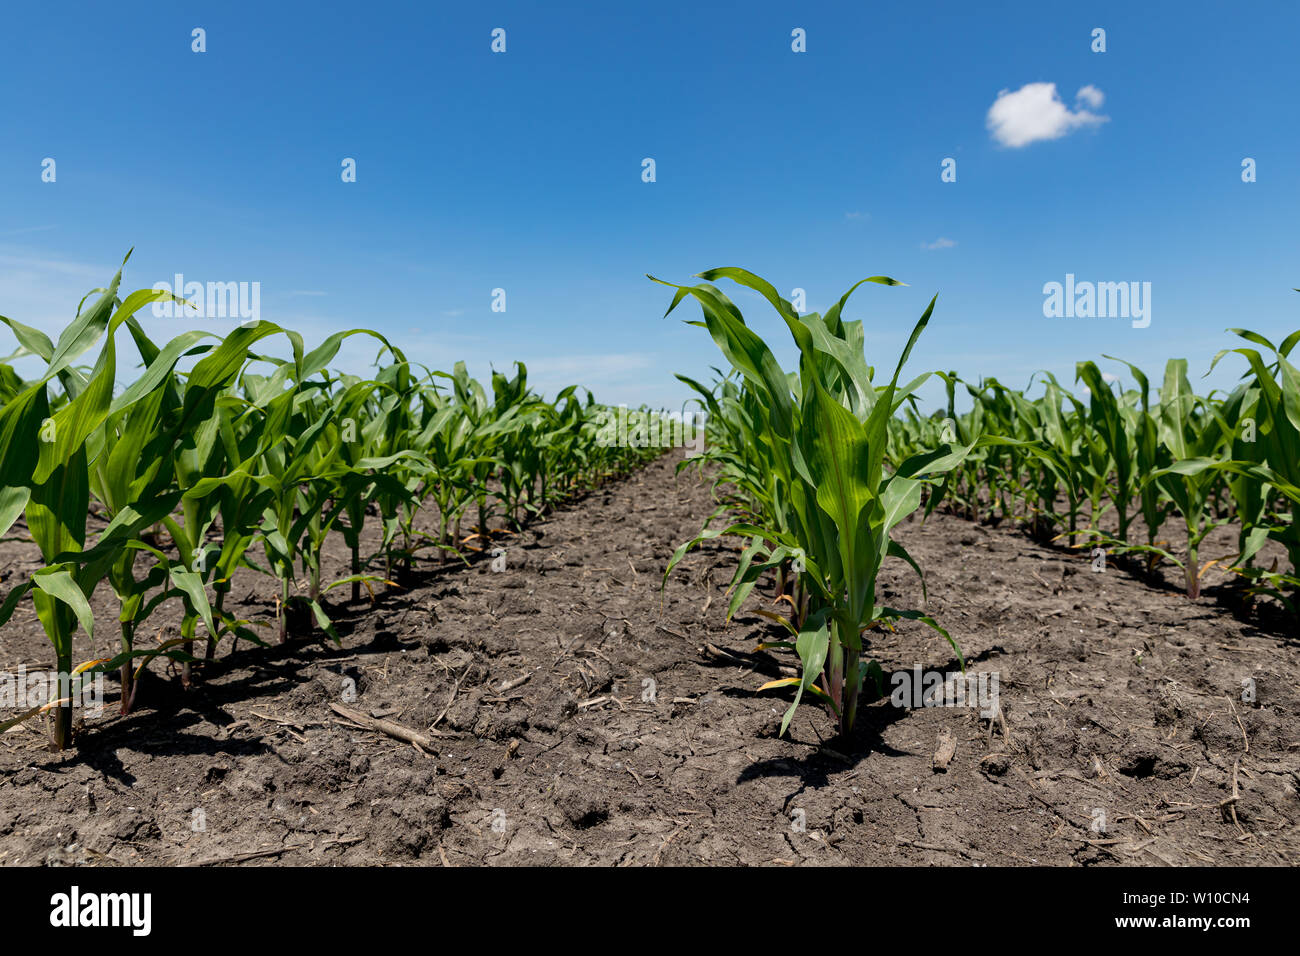 Healthy young corn plants growing in rows in cornfield with no weeds Stock Photo